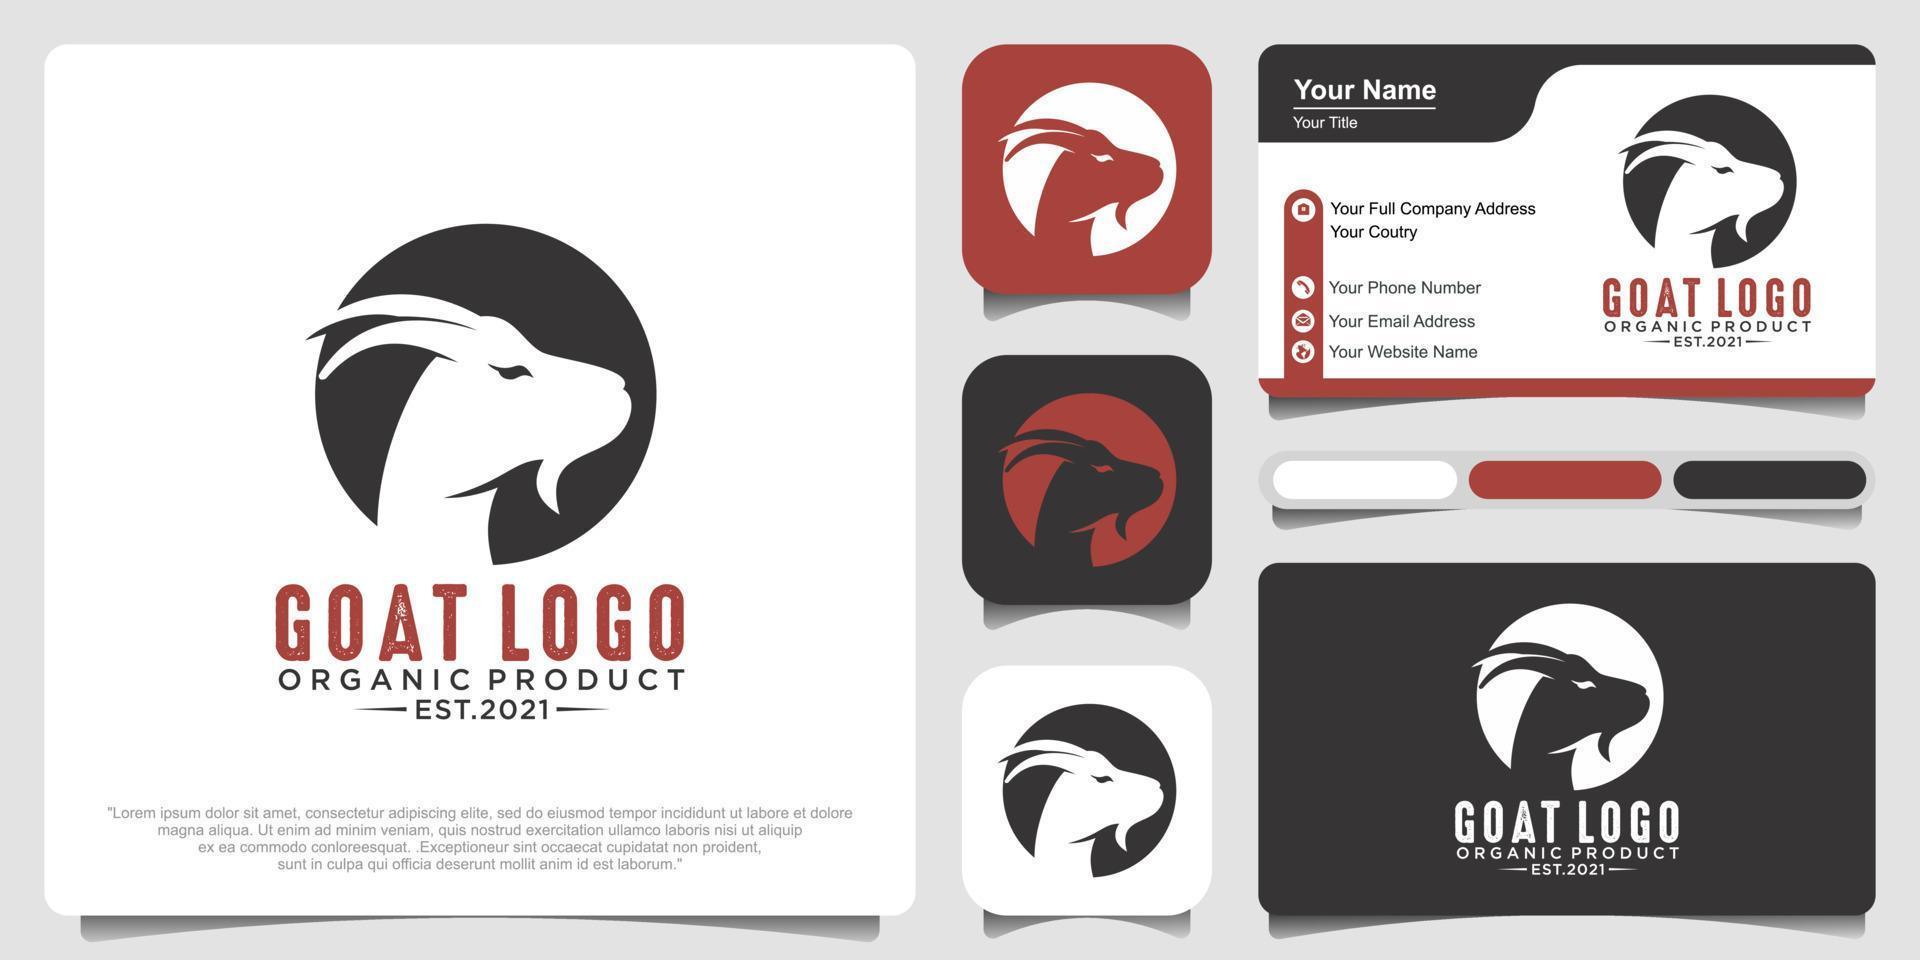 Goat logo design template with business card vector